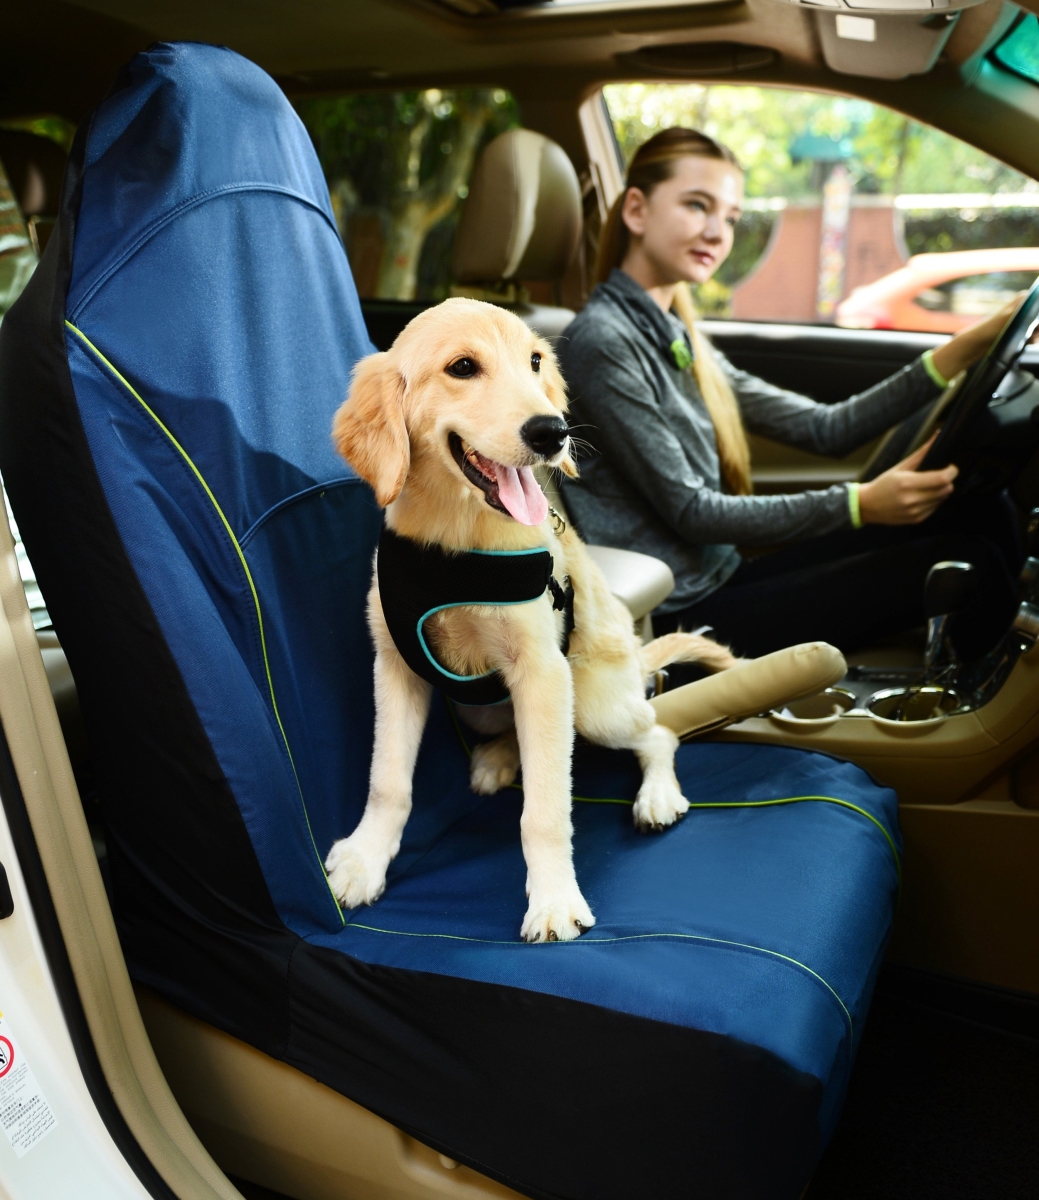 Picture of Pet Life CRT1BL Open Road Mess Free Single Seated Safety Car Seat Cover Protector, Blue - One Size